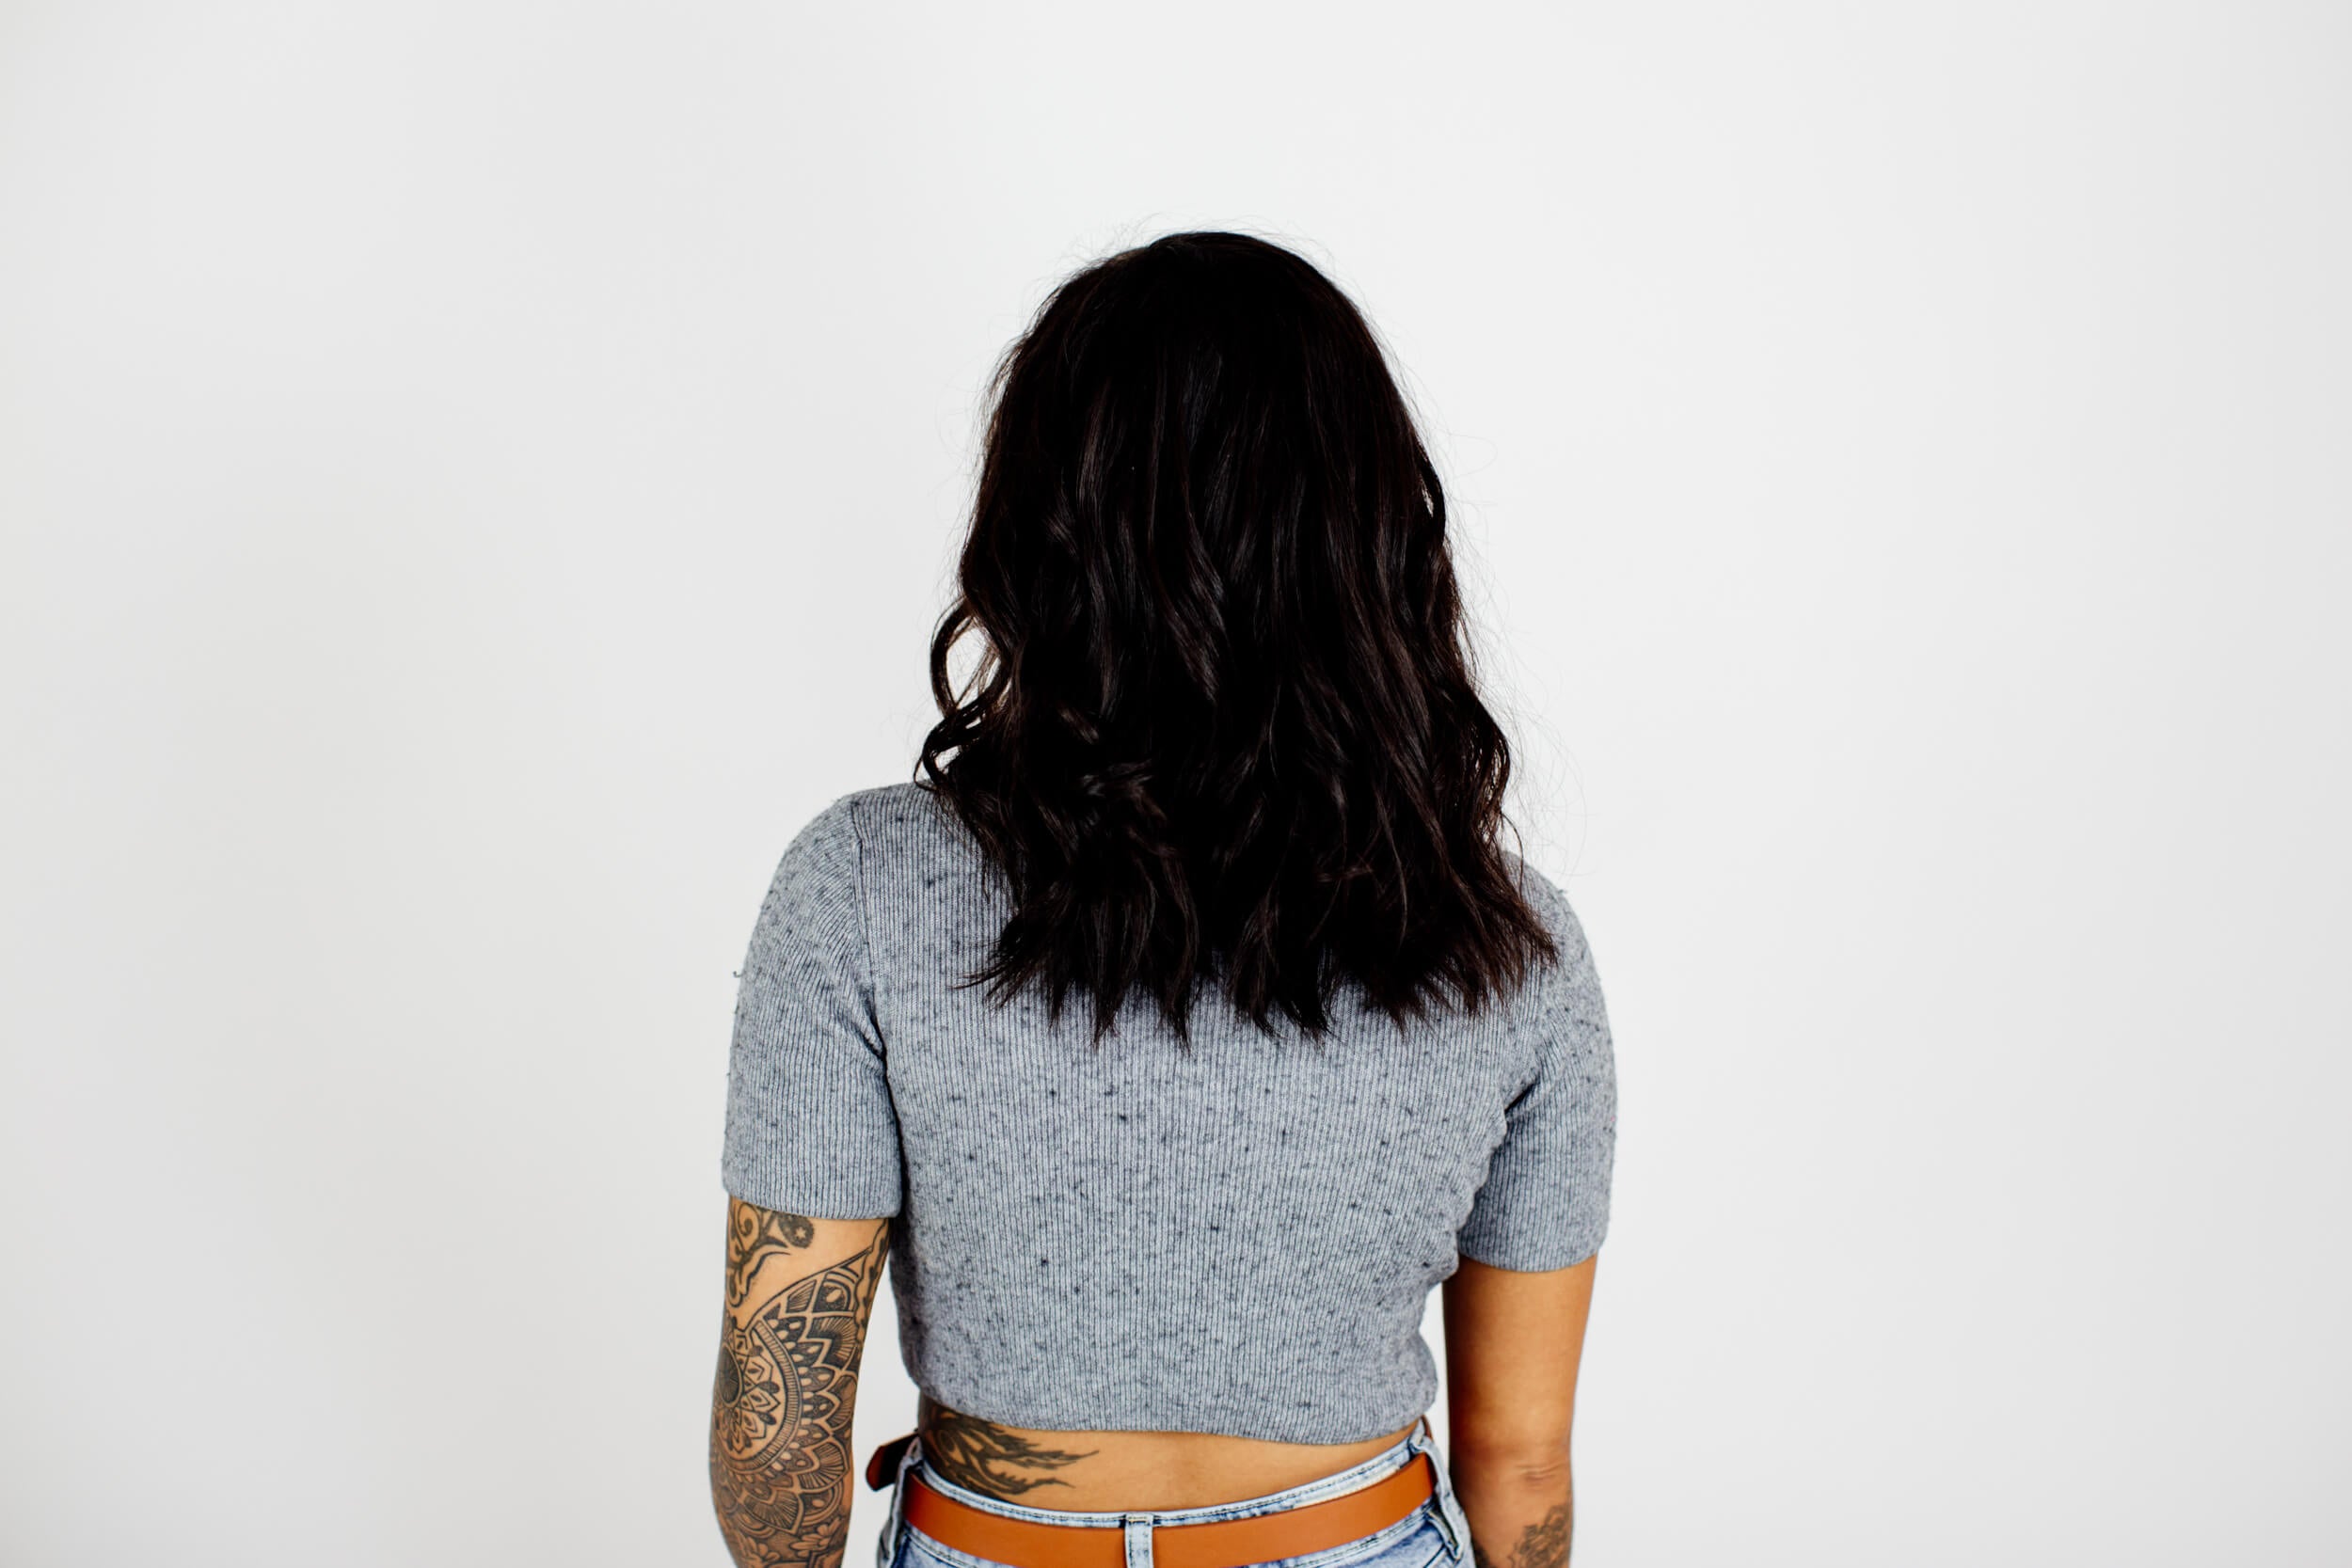 A woman with black permed hair seen from the back.